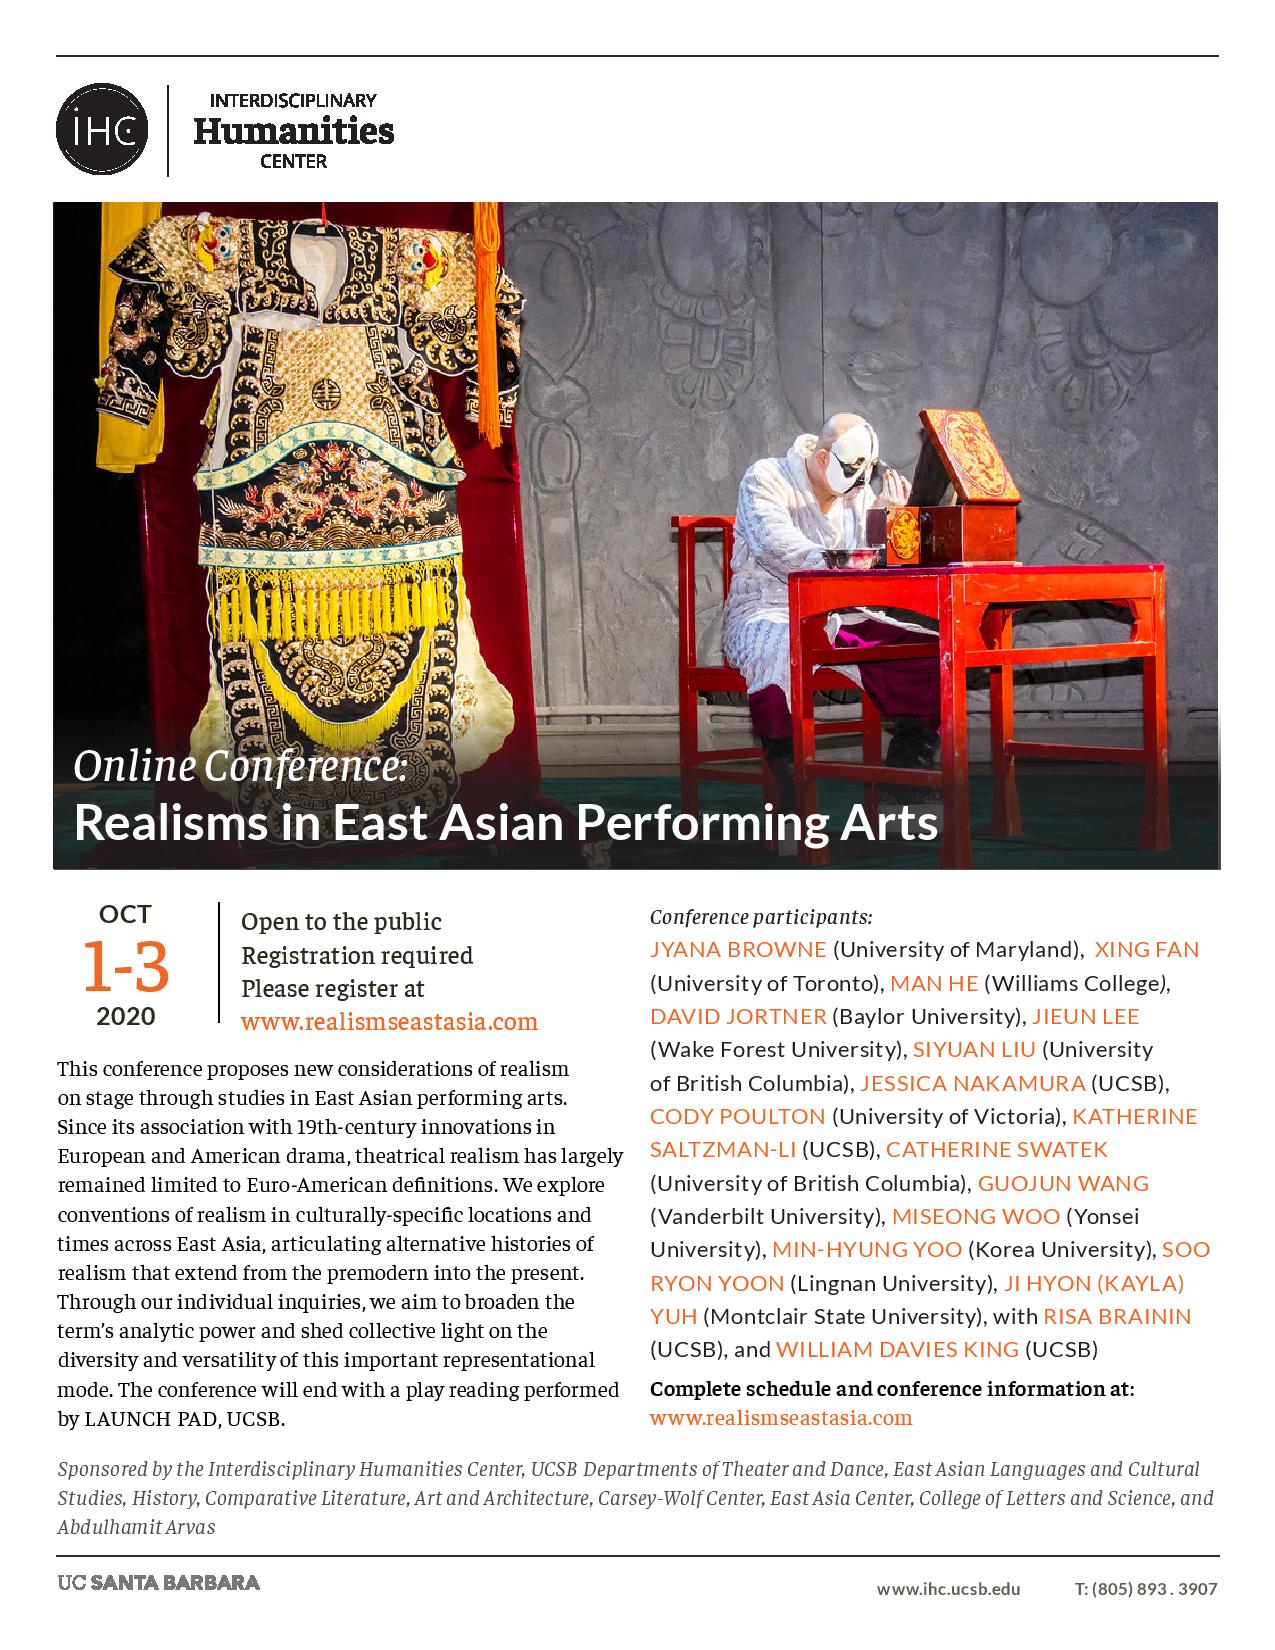 Flyer for online conference for Realisms in East Asian Performing Arts on 10/1-3/20